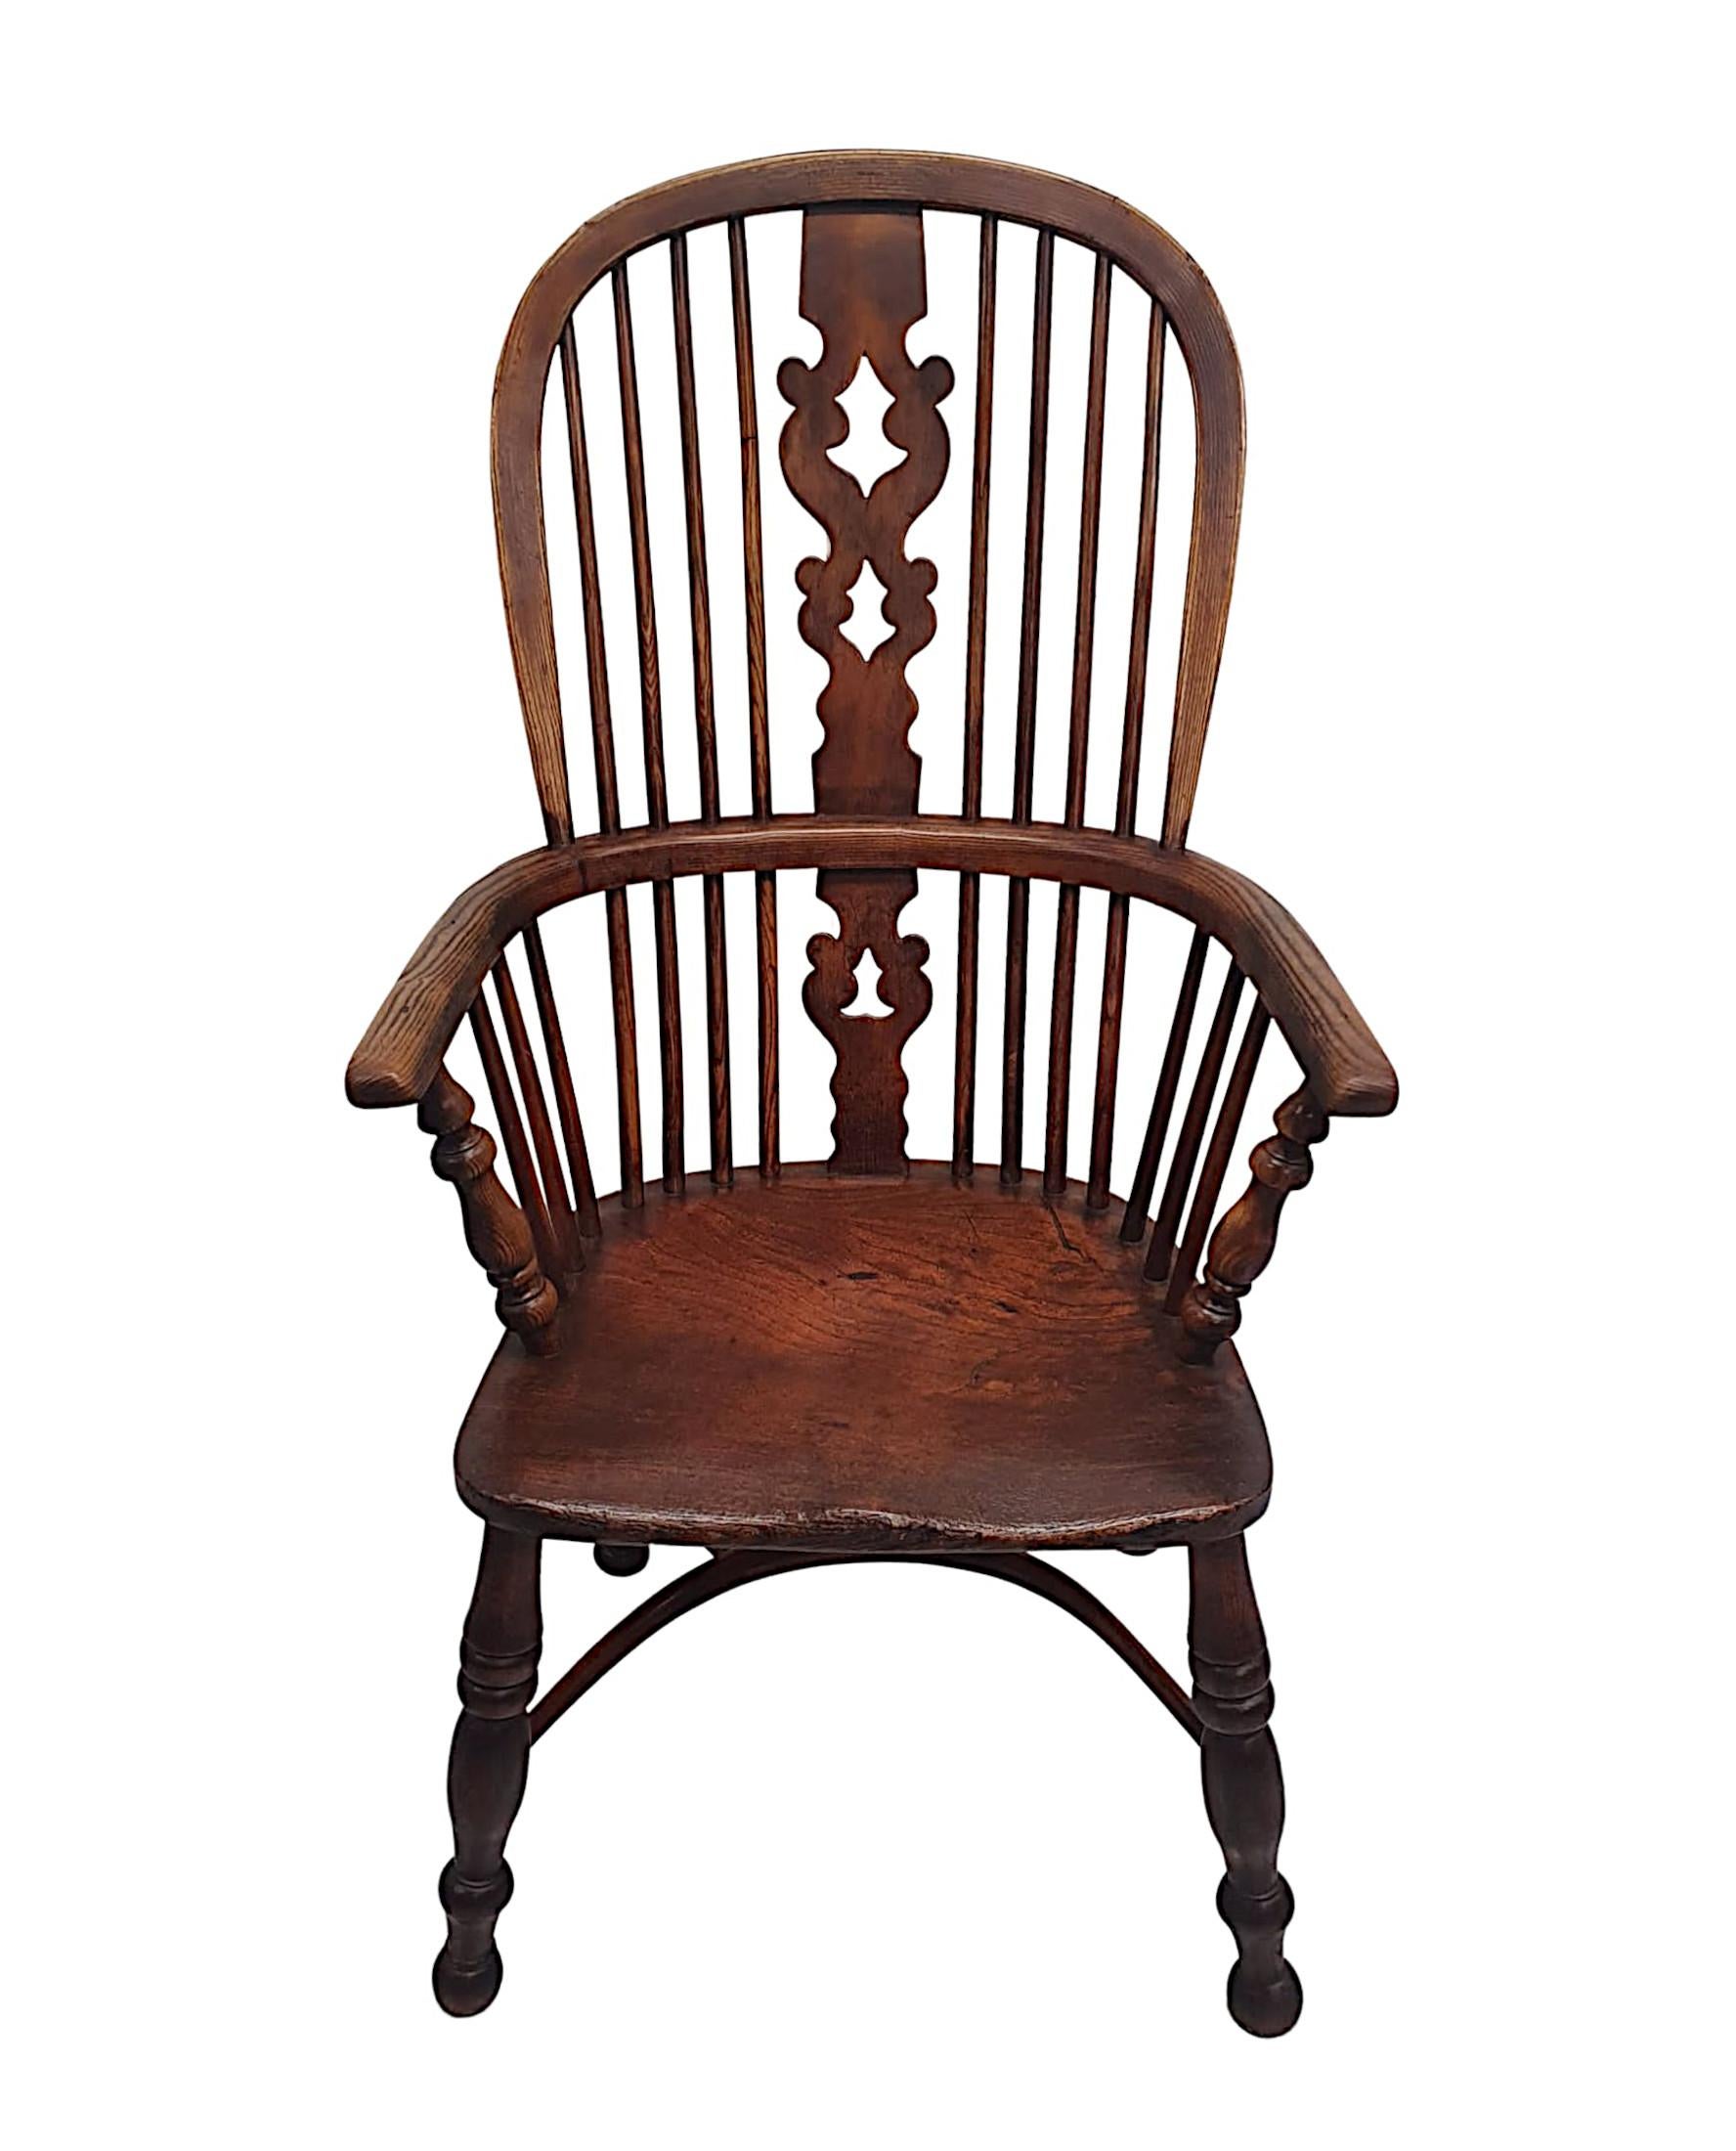 English Very Rare and Fine 19th Century High Back Windsor Armchair For Sale